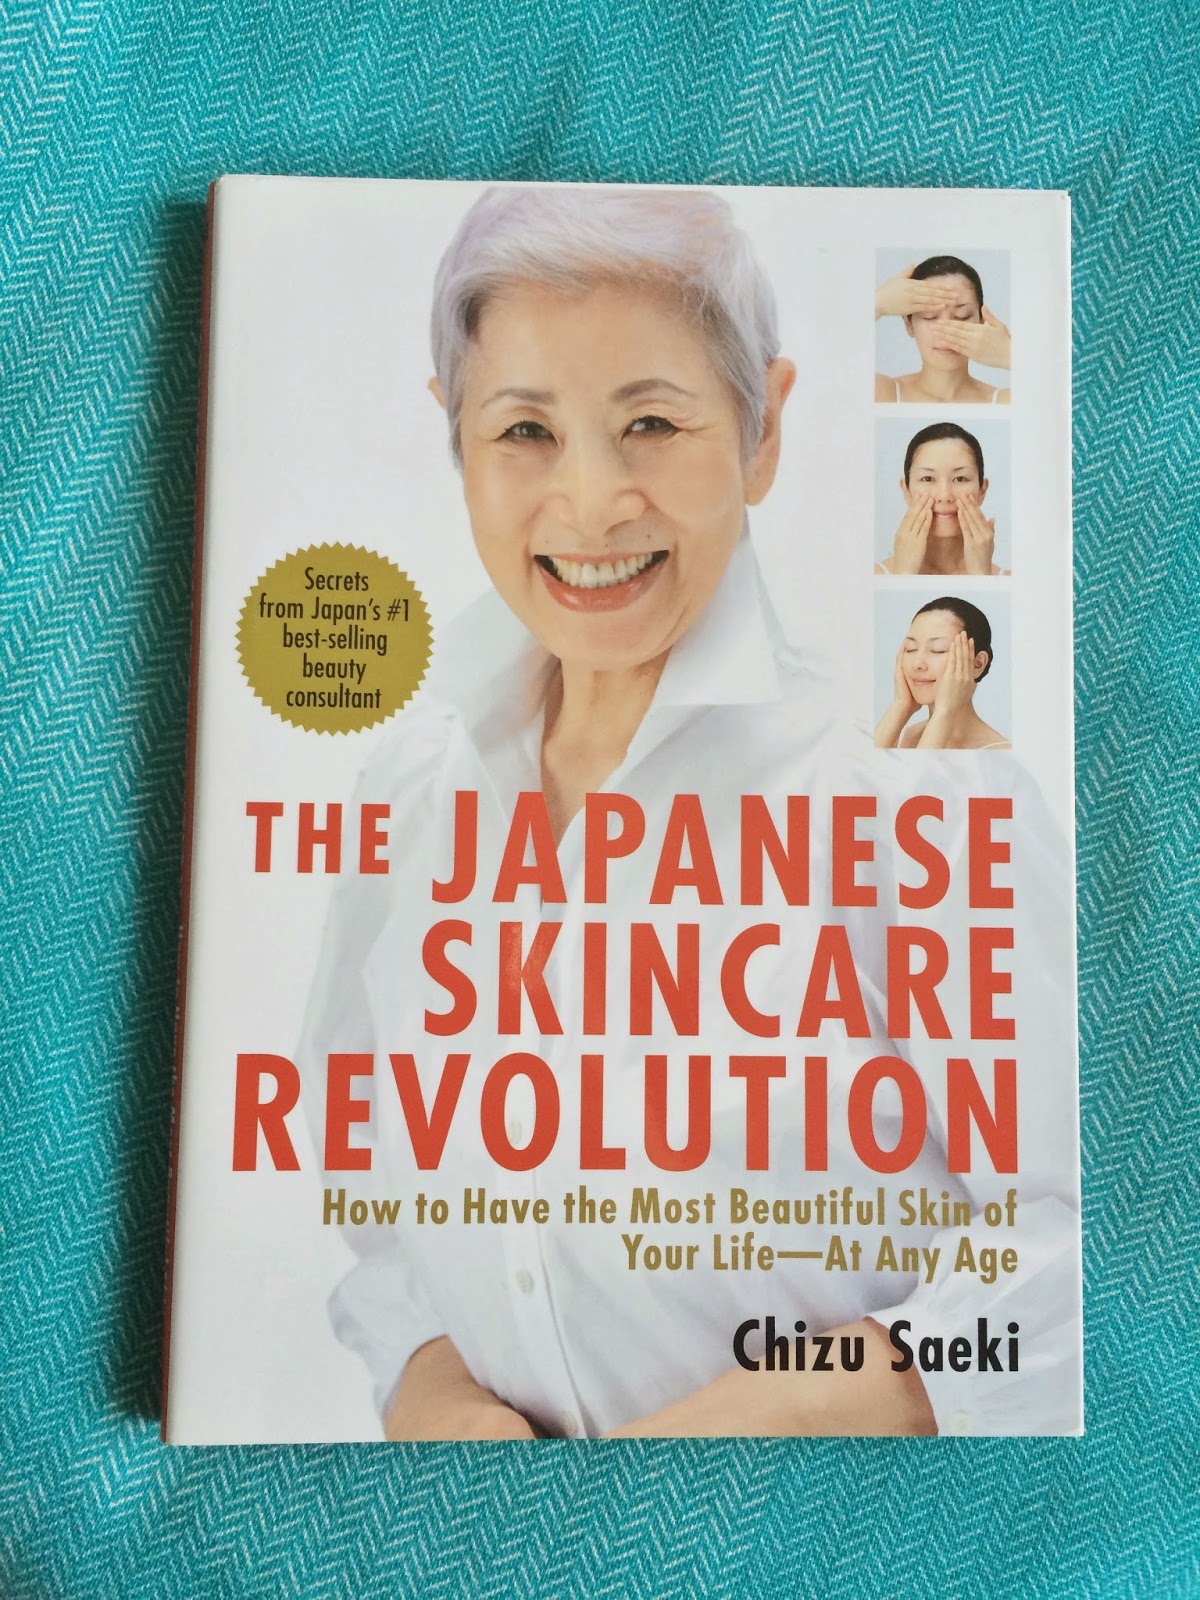 the japanese skincare revolution how to have the most beautiful skin of your life, at any age